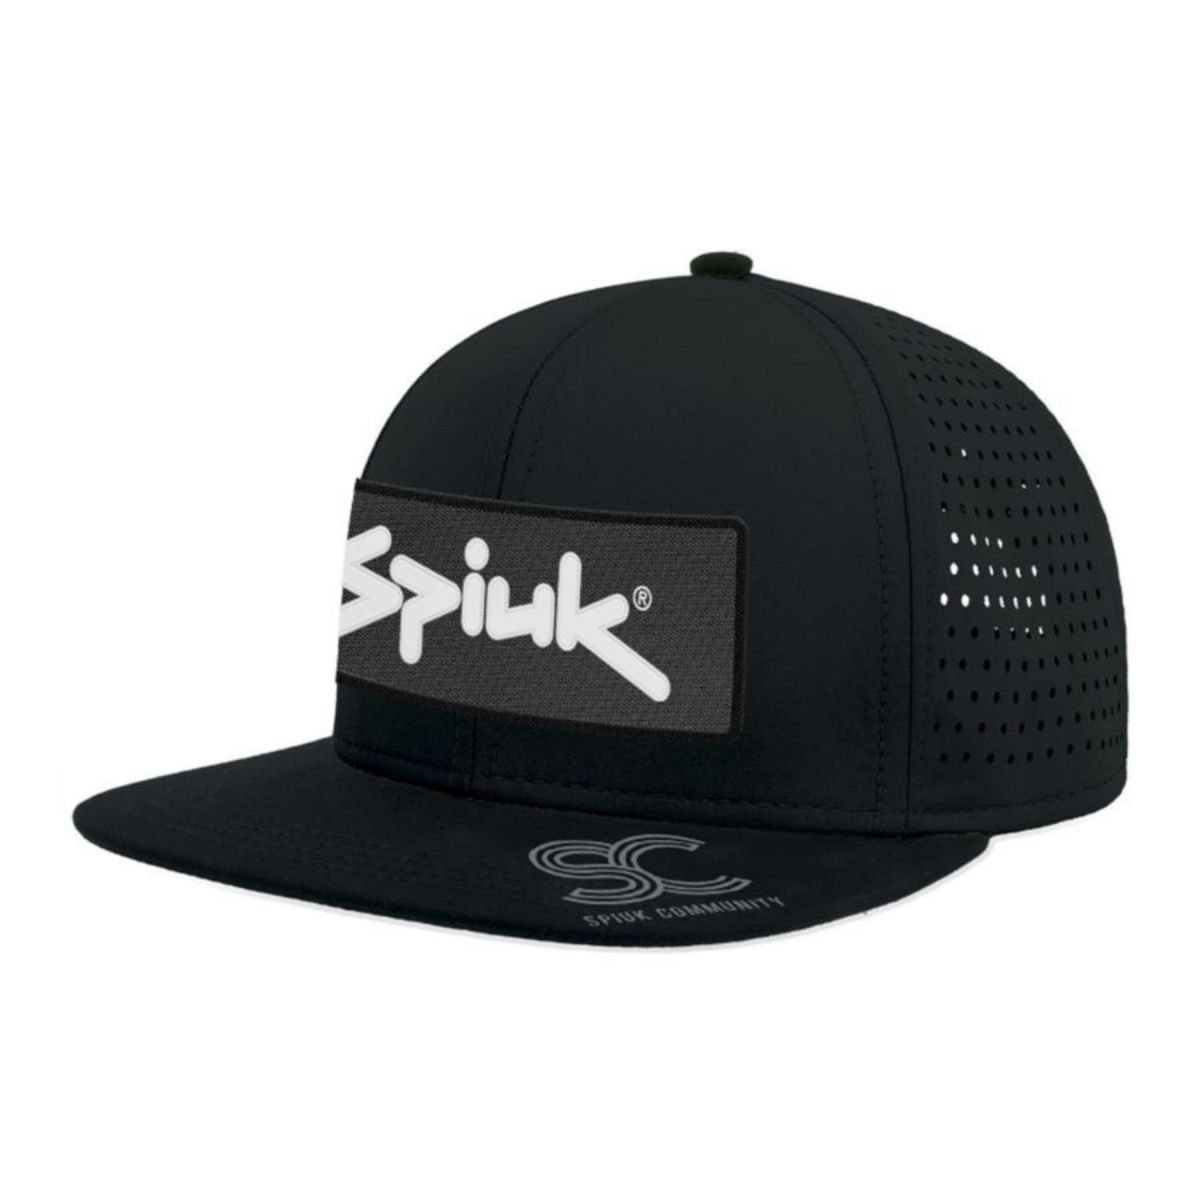 Gorra SC Community Hombre Spiuk Negro Bicycles4ever